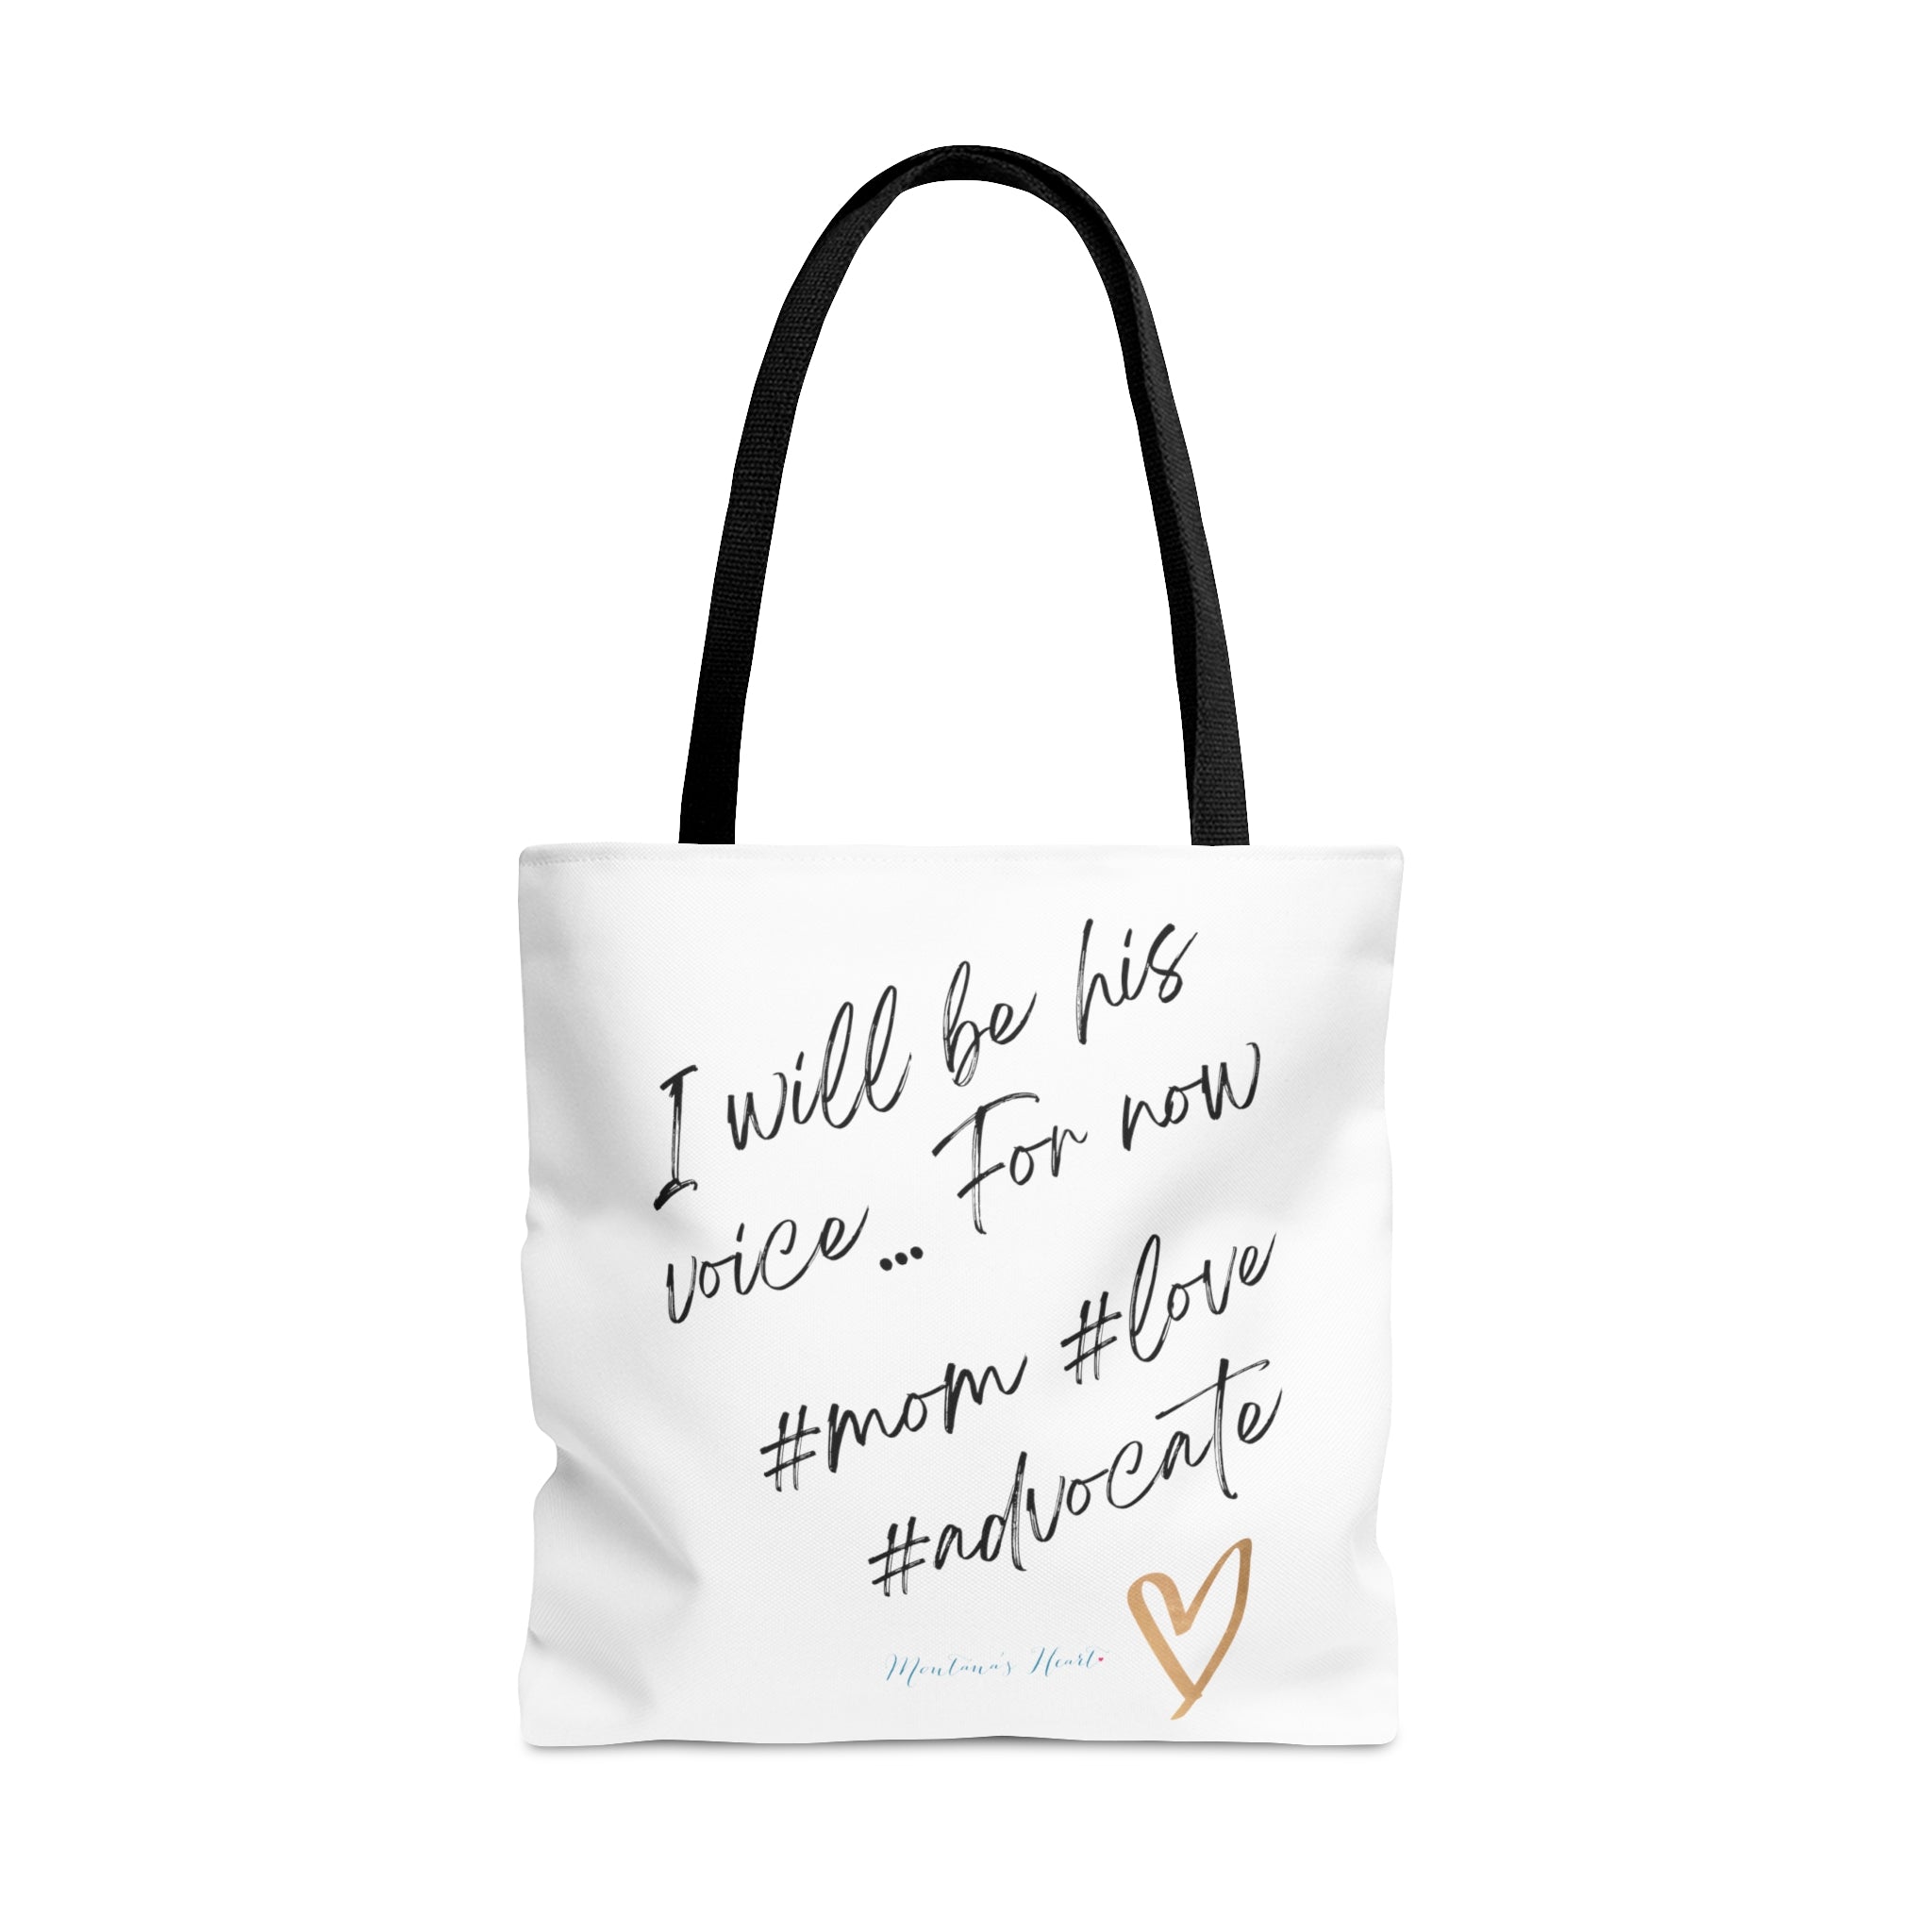 I will be his voice for now.. advocate mom tote bag, IEP mom